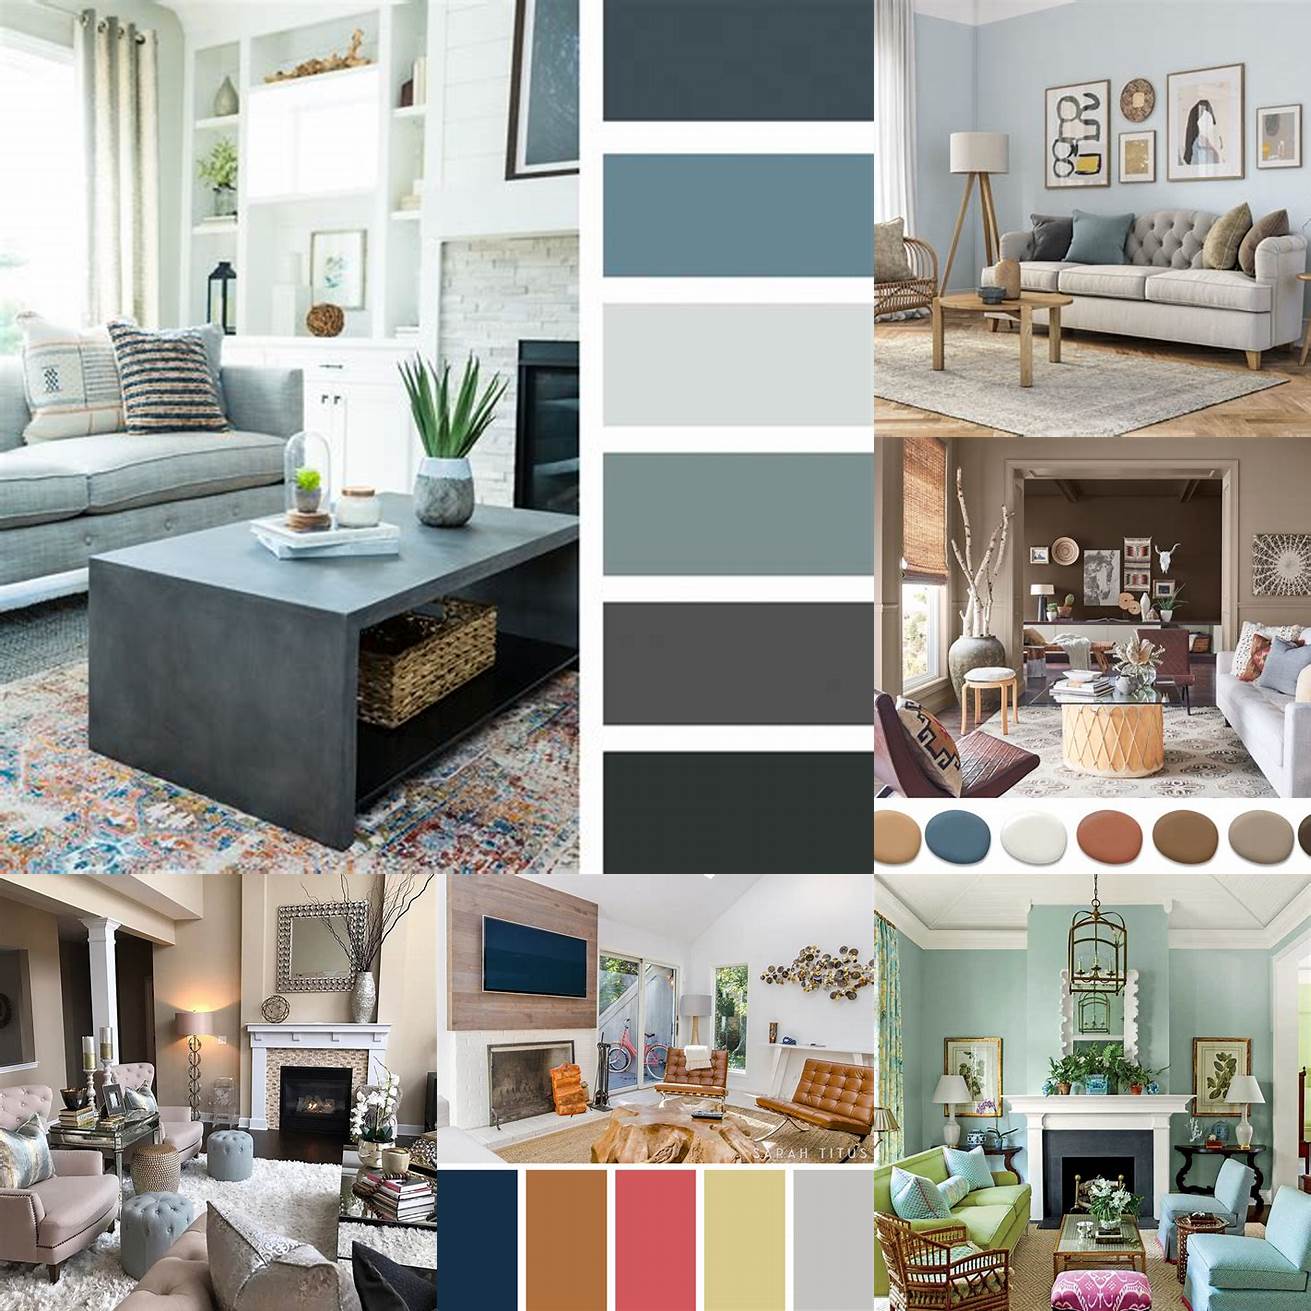 Stick to a neutral color palette for a calming environment